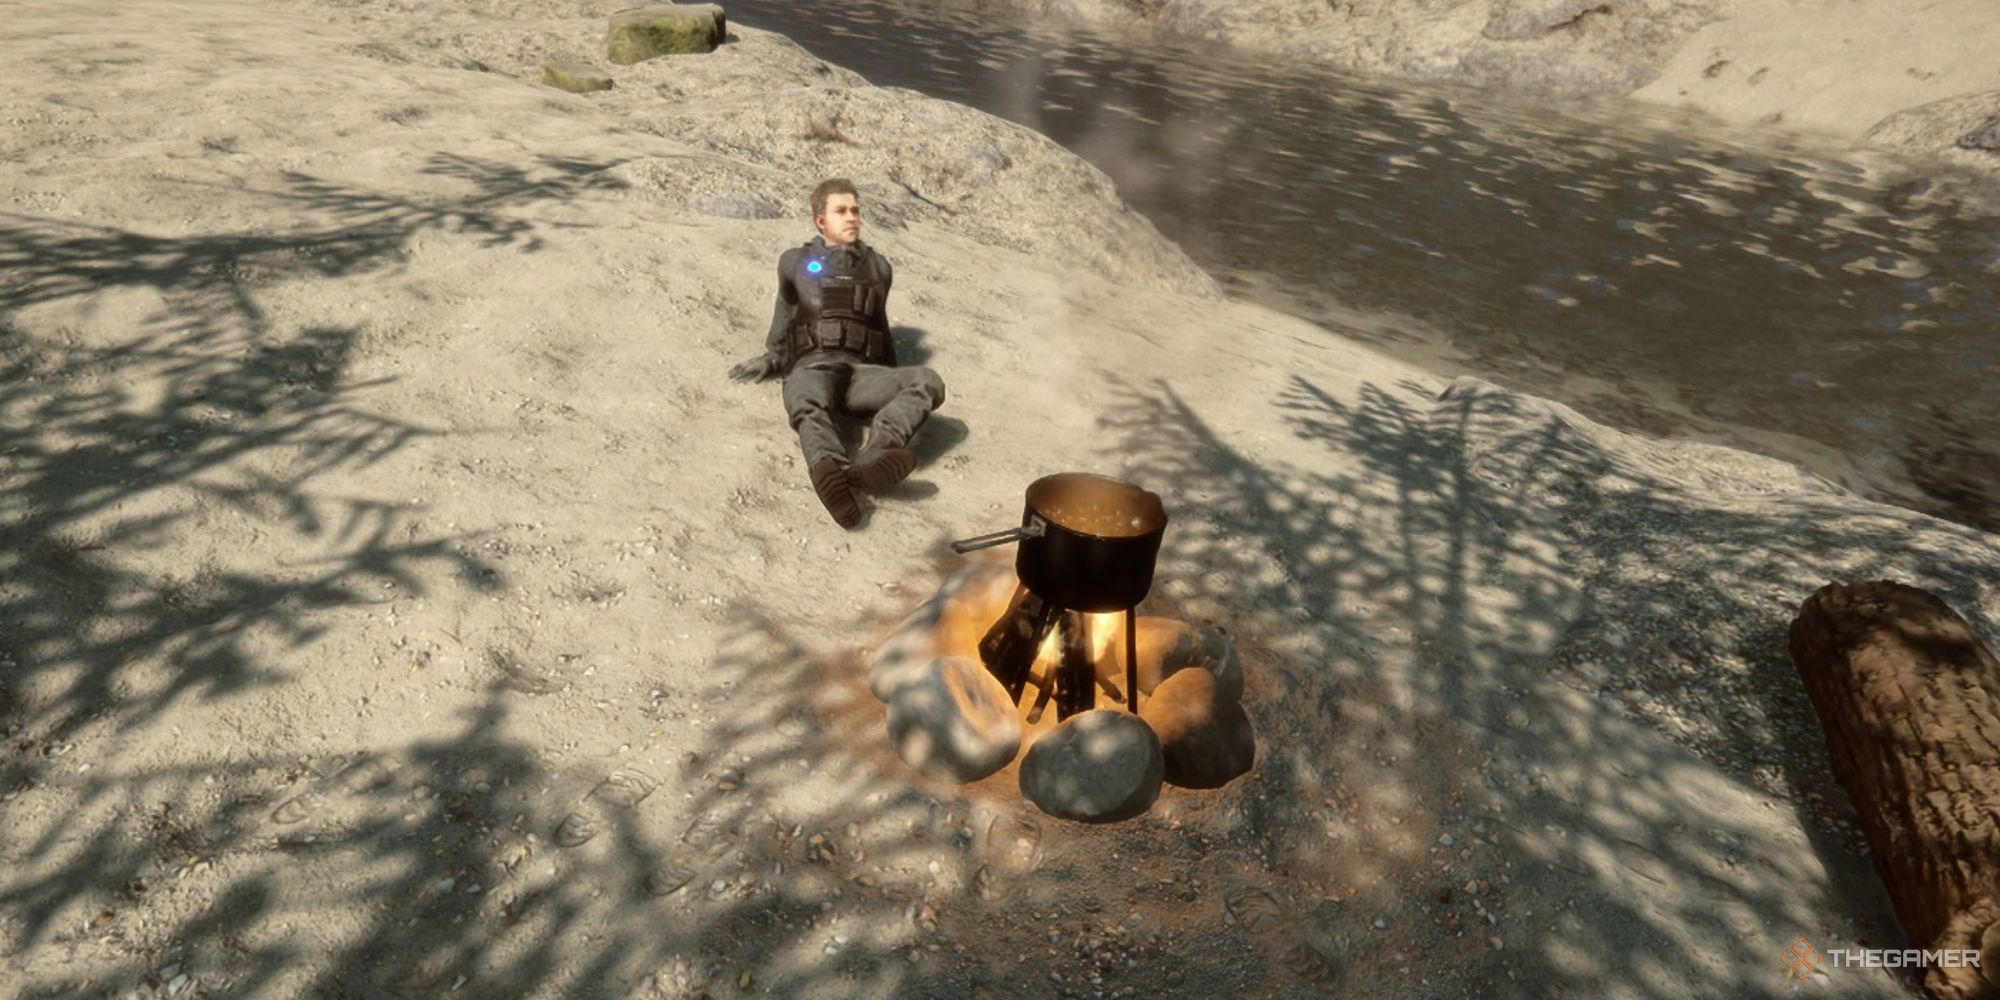 A screenshot from Sons of the Forest showing Kelvin relaxing by a fire on a beach. The fire has an uncovered pot on top, with steam rising from the boiling water.